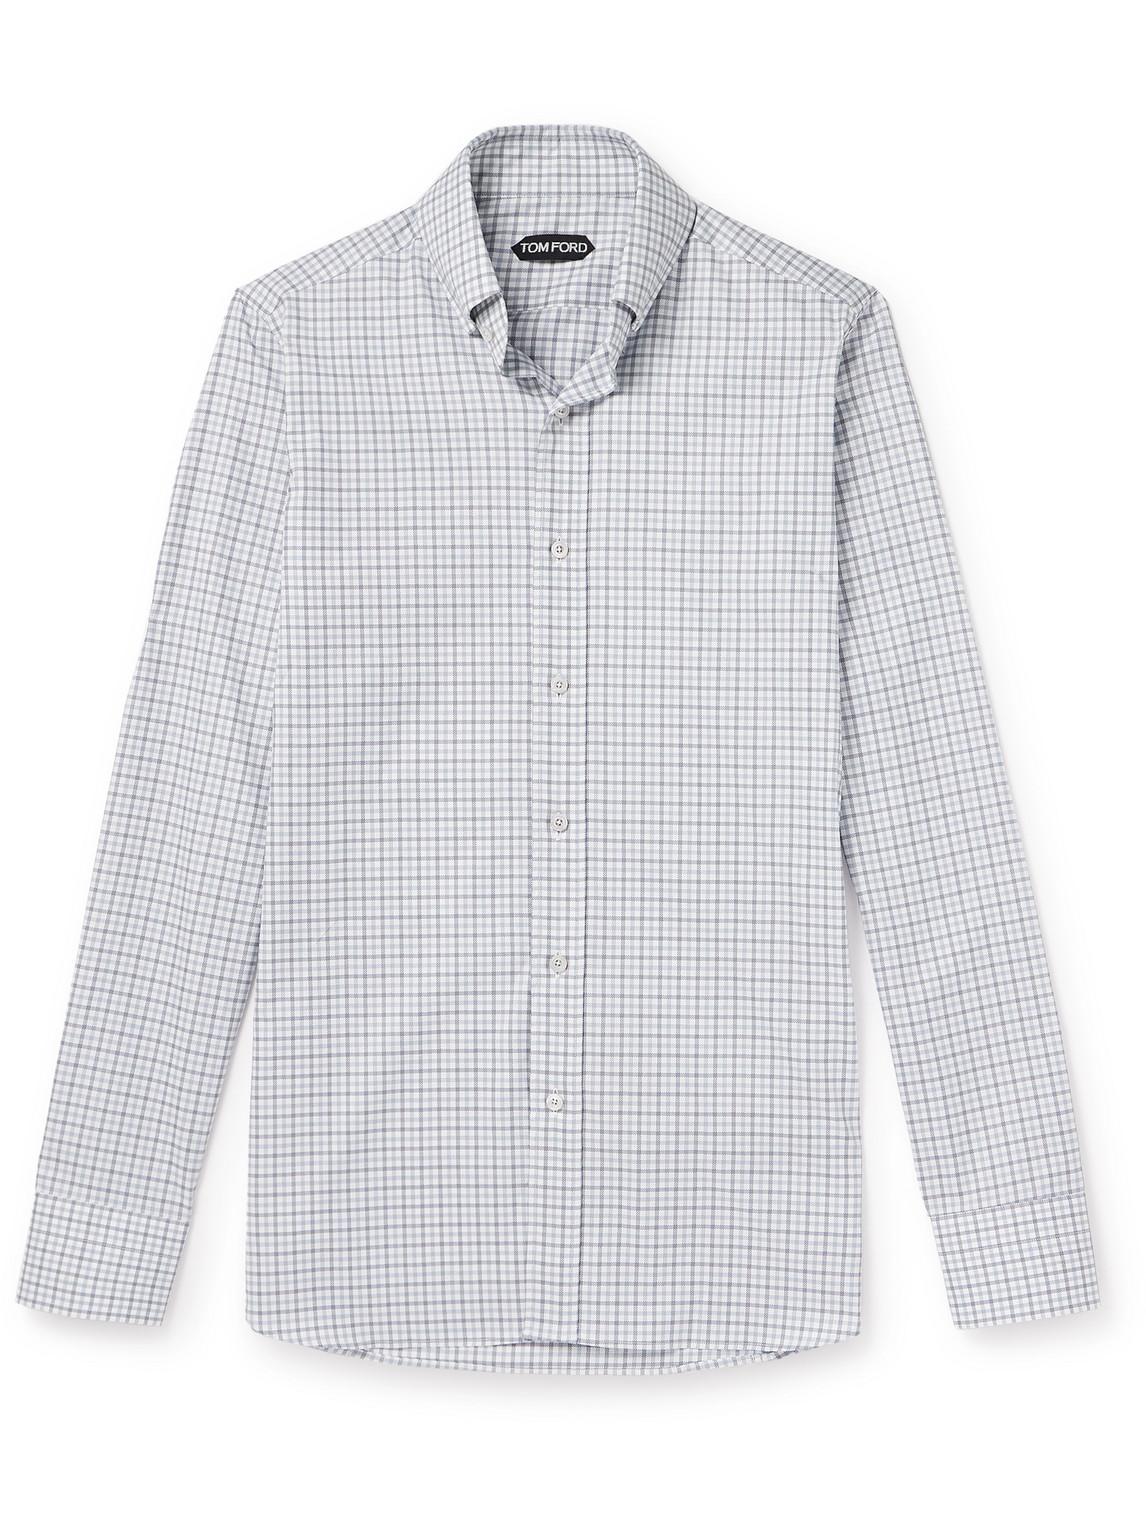 TOM FORD SLIM-FIT BUTTON-DOWN COLLAR CHECKED COTTON SHIRT